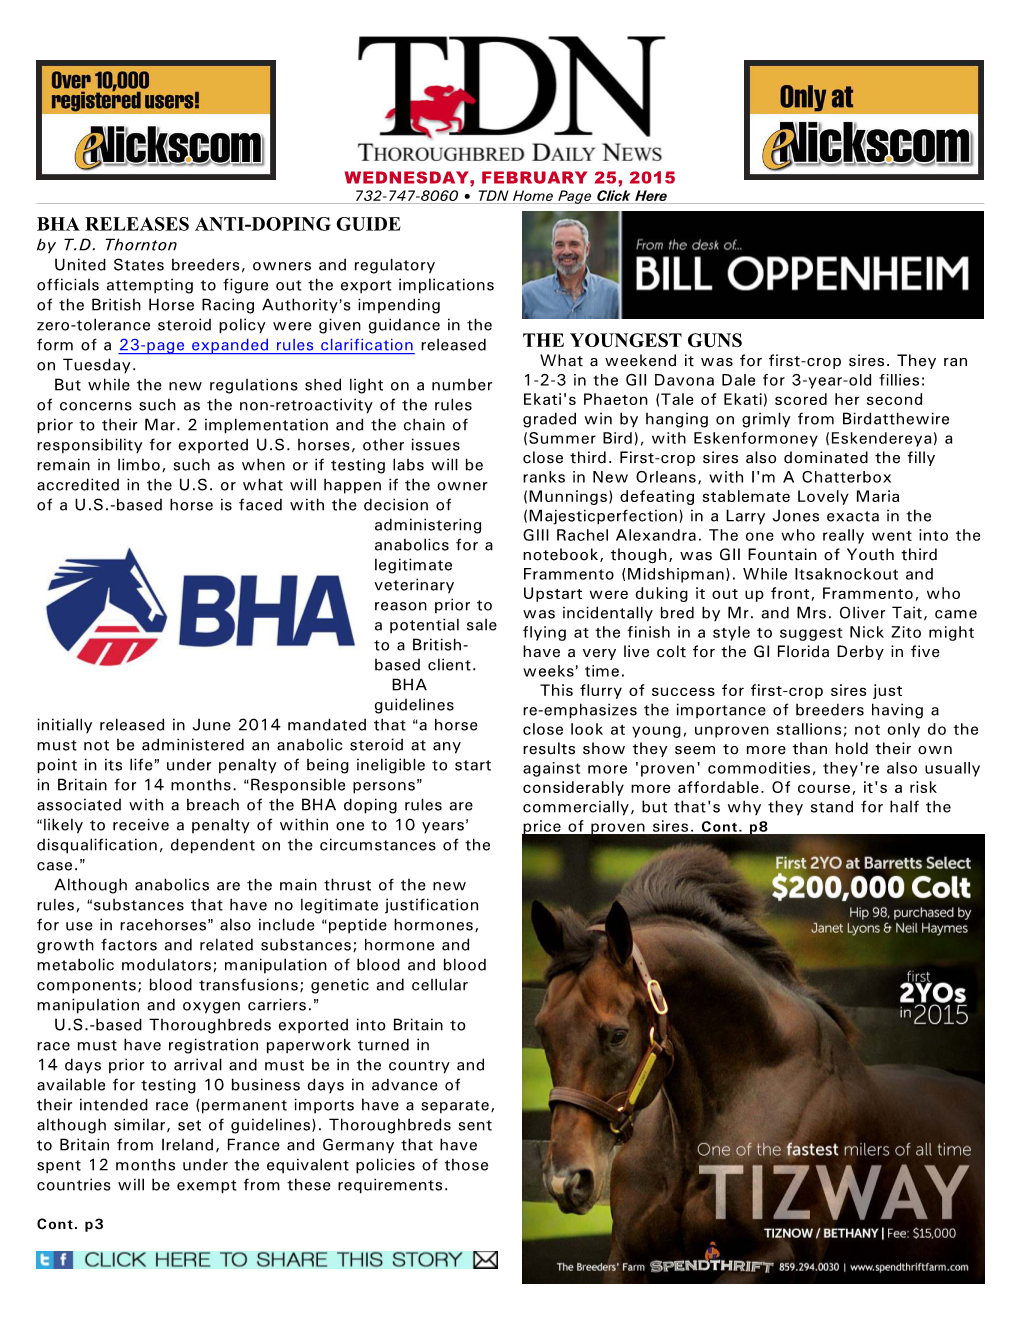 Bha Releases Anti-Doping Guide the Youngest Guns